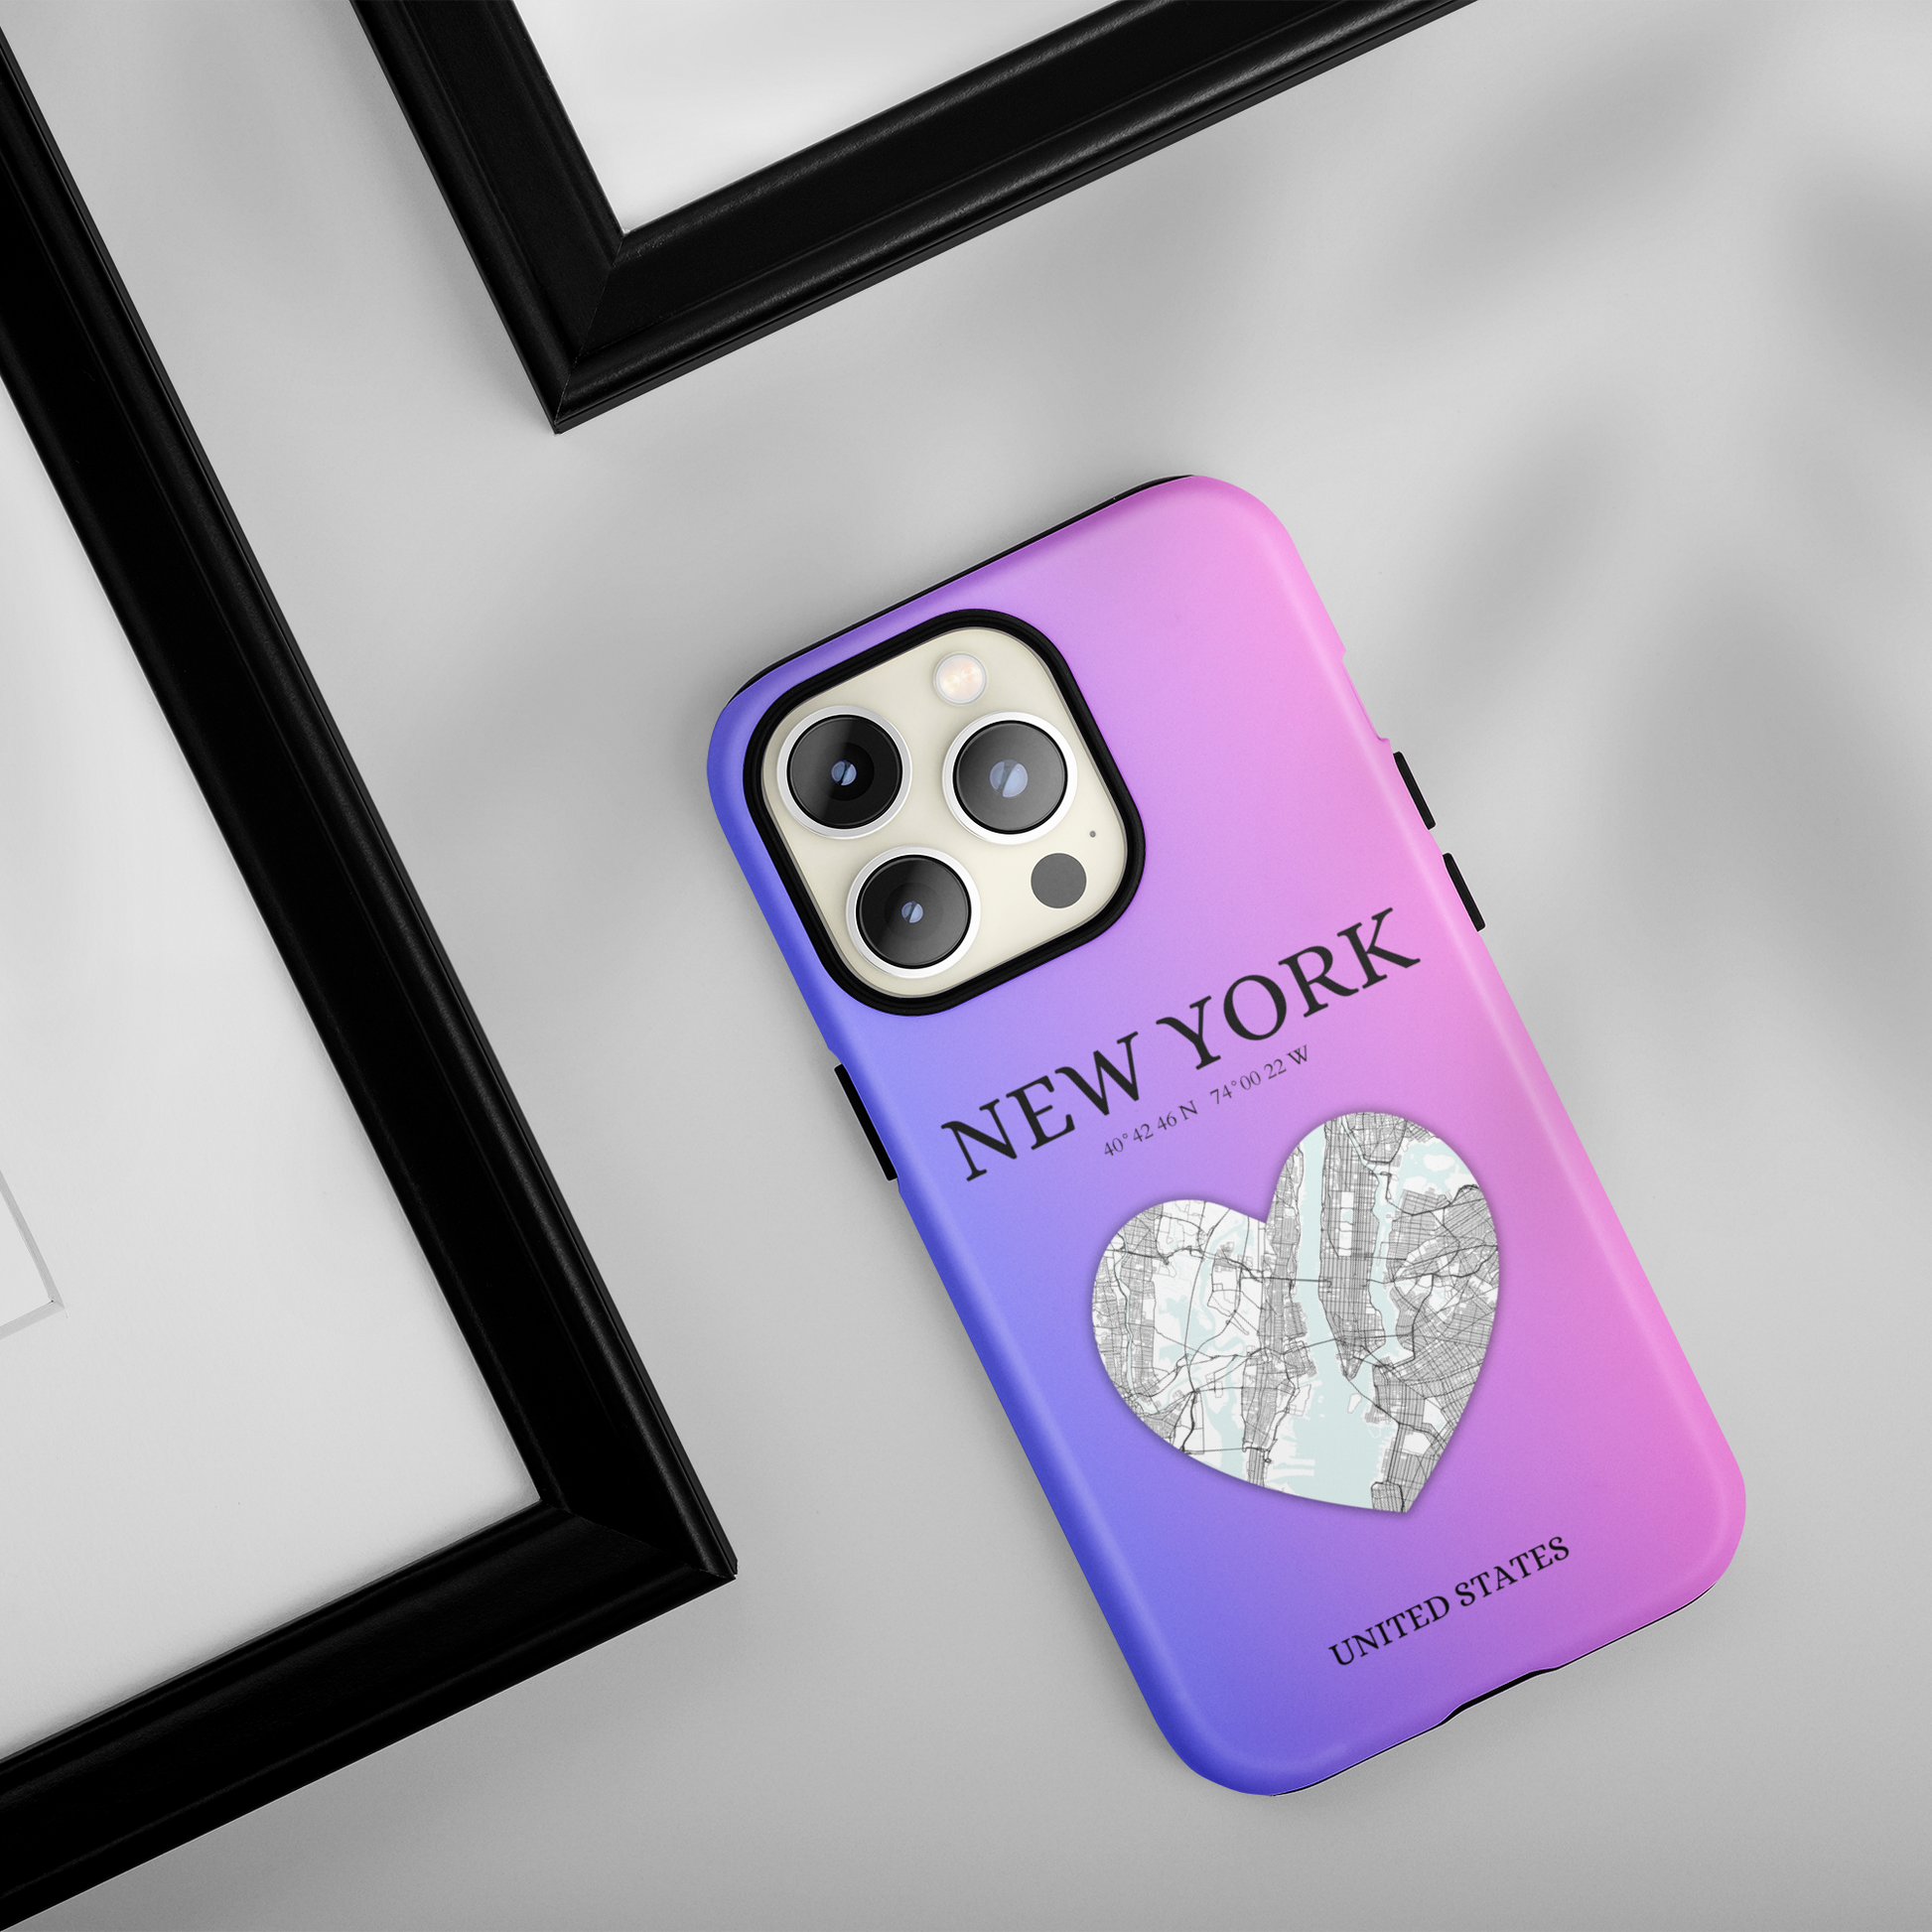 Elevate your iPhone with RimaGallery's New York Heartbeat case. Sleek design meets durability for stylish protection. Free US shipping.-York Heartbeat - Magenta (iPhone Case 11-15)